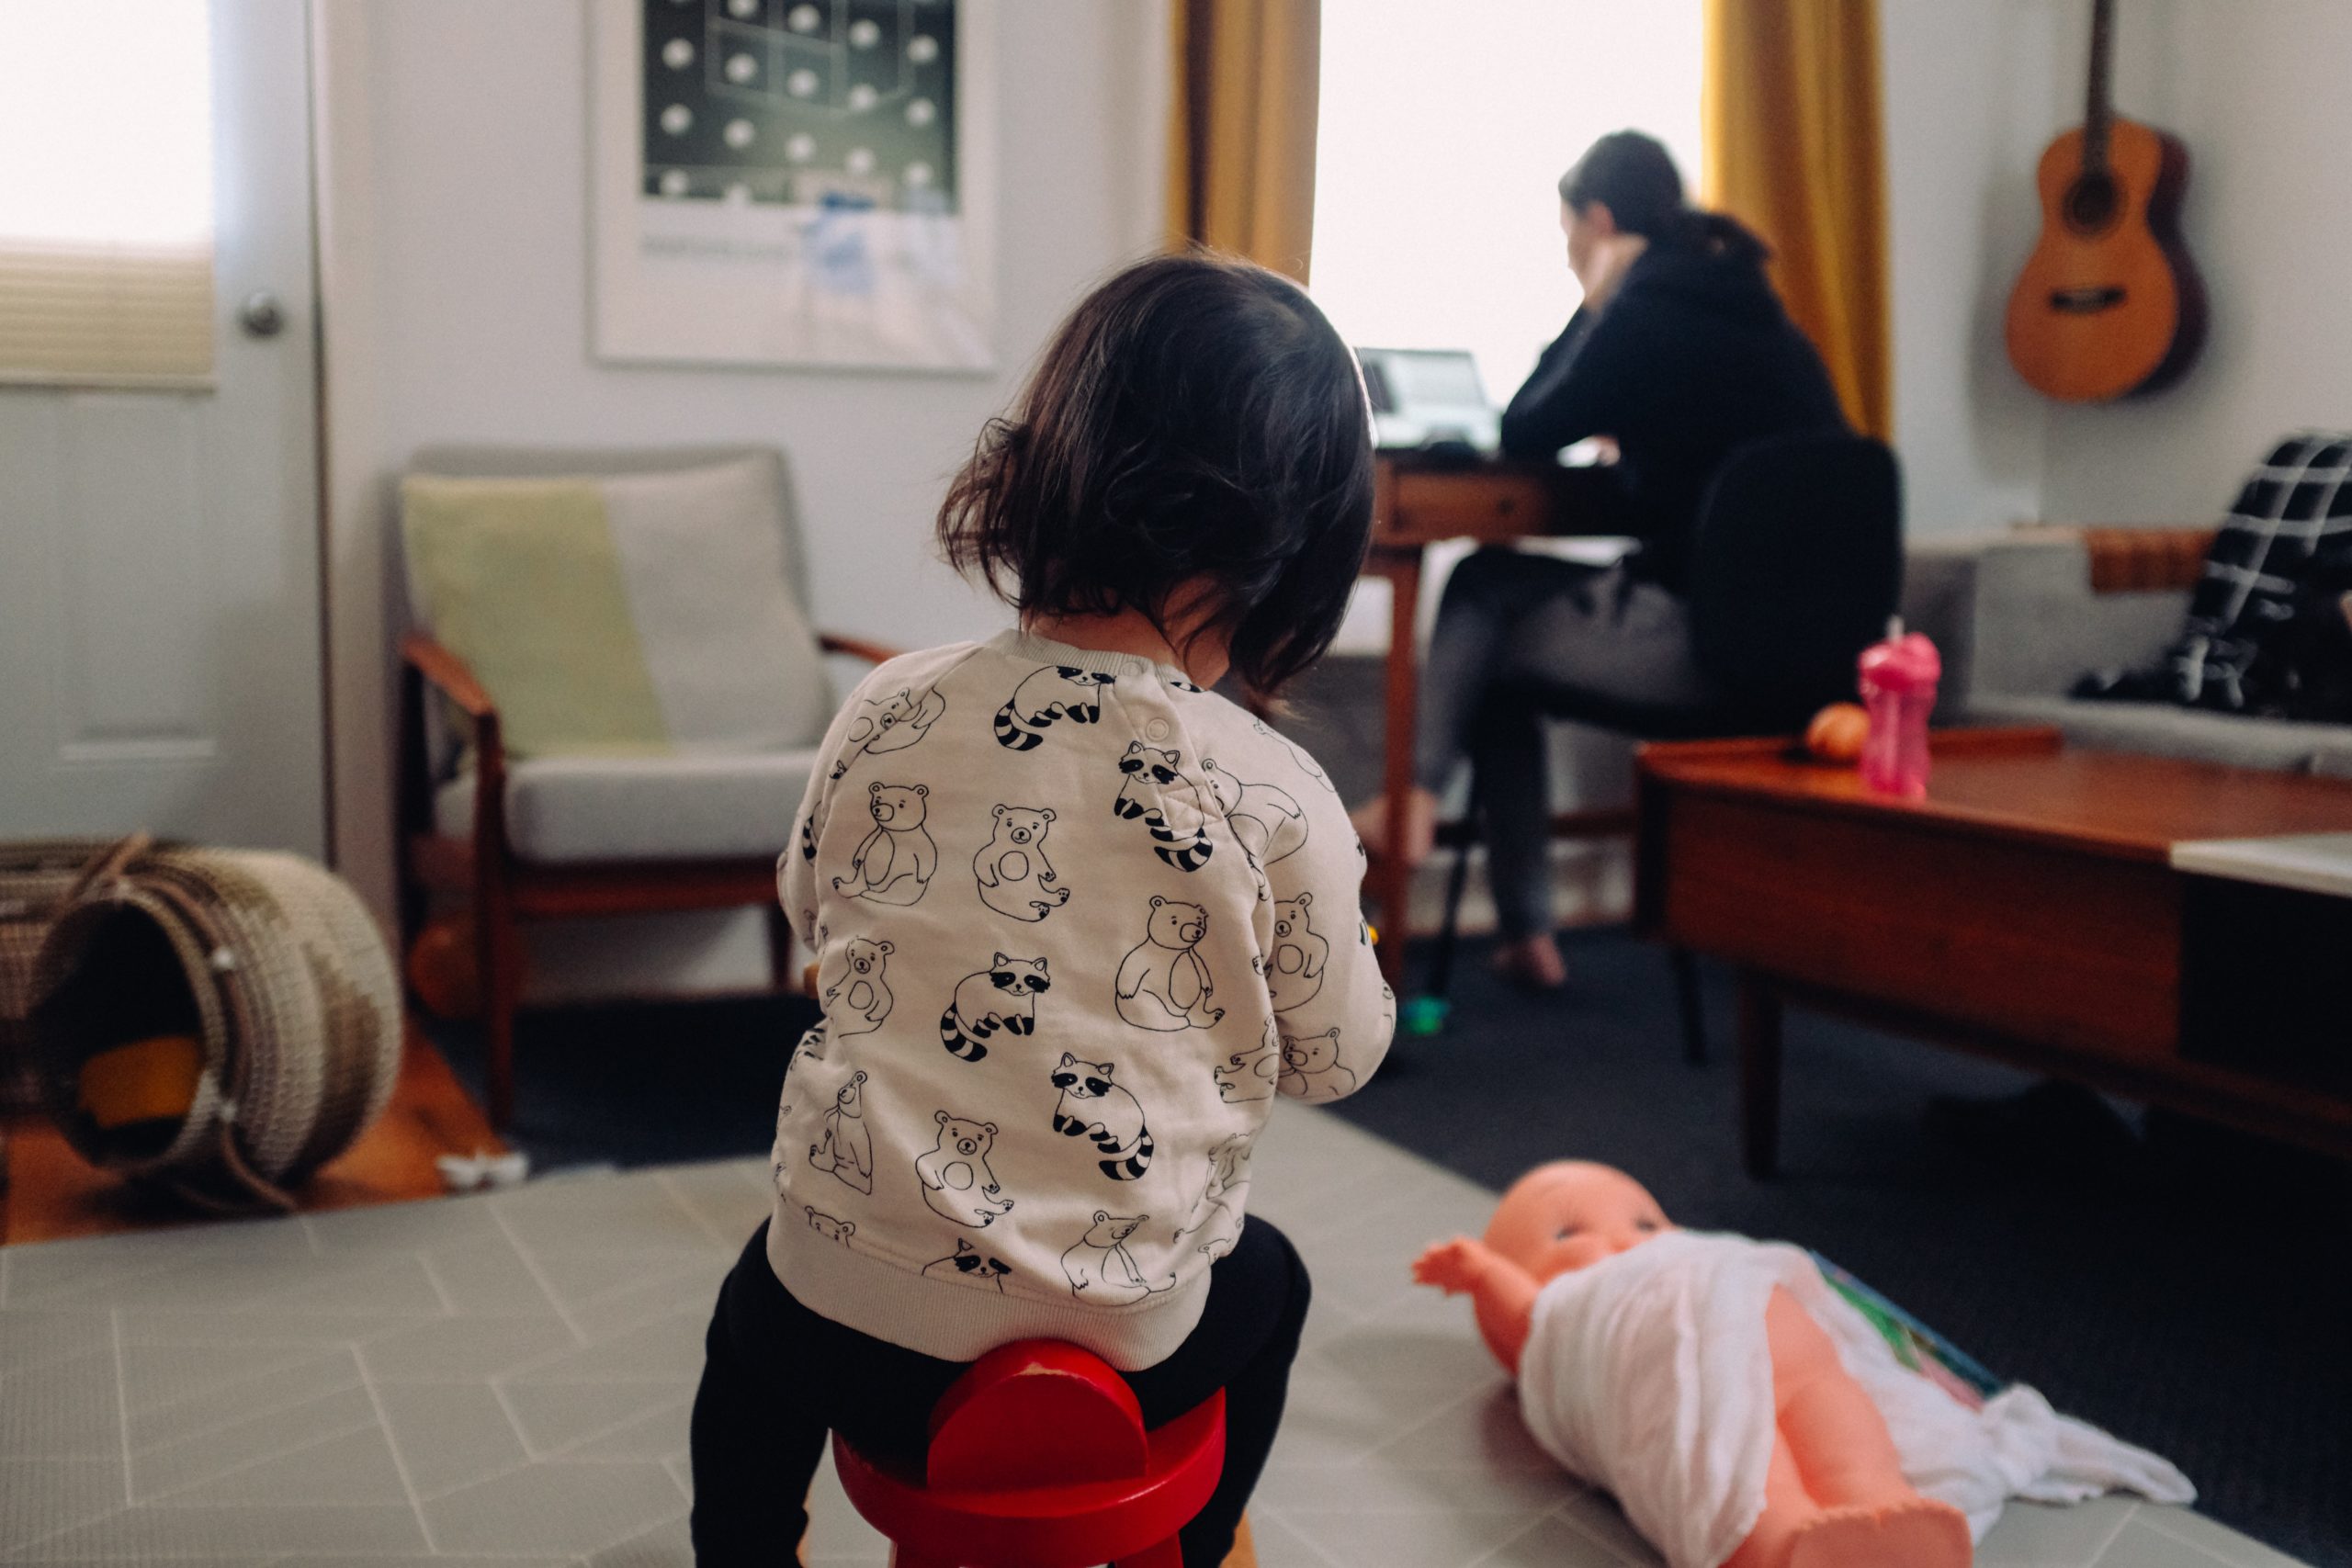 child playing in a living room while their parent works on a laptop